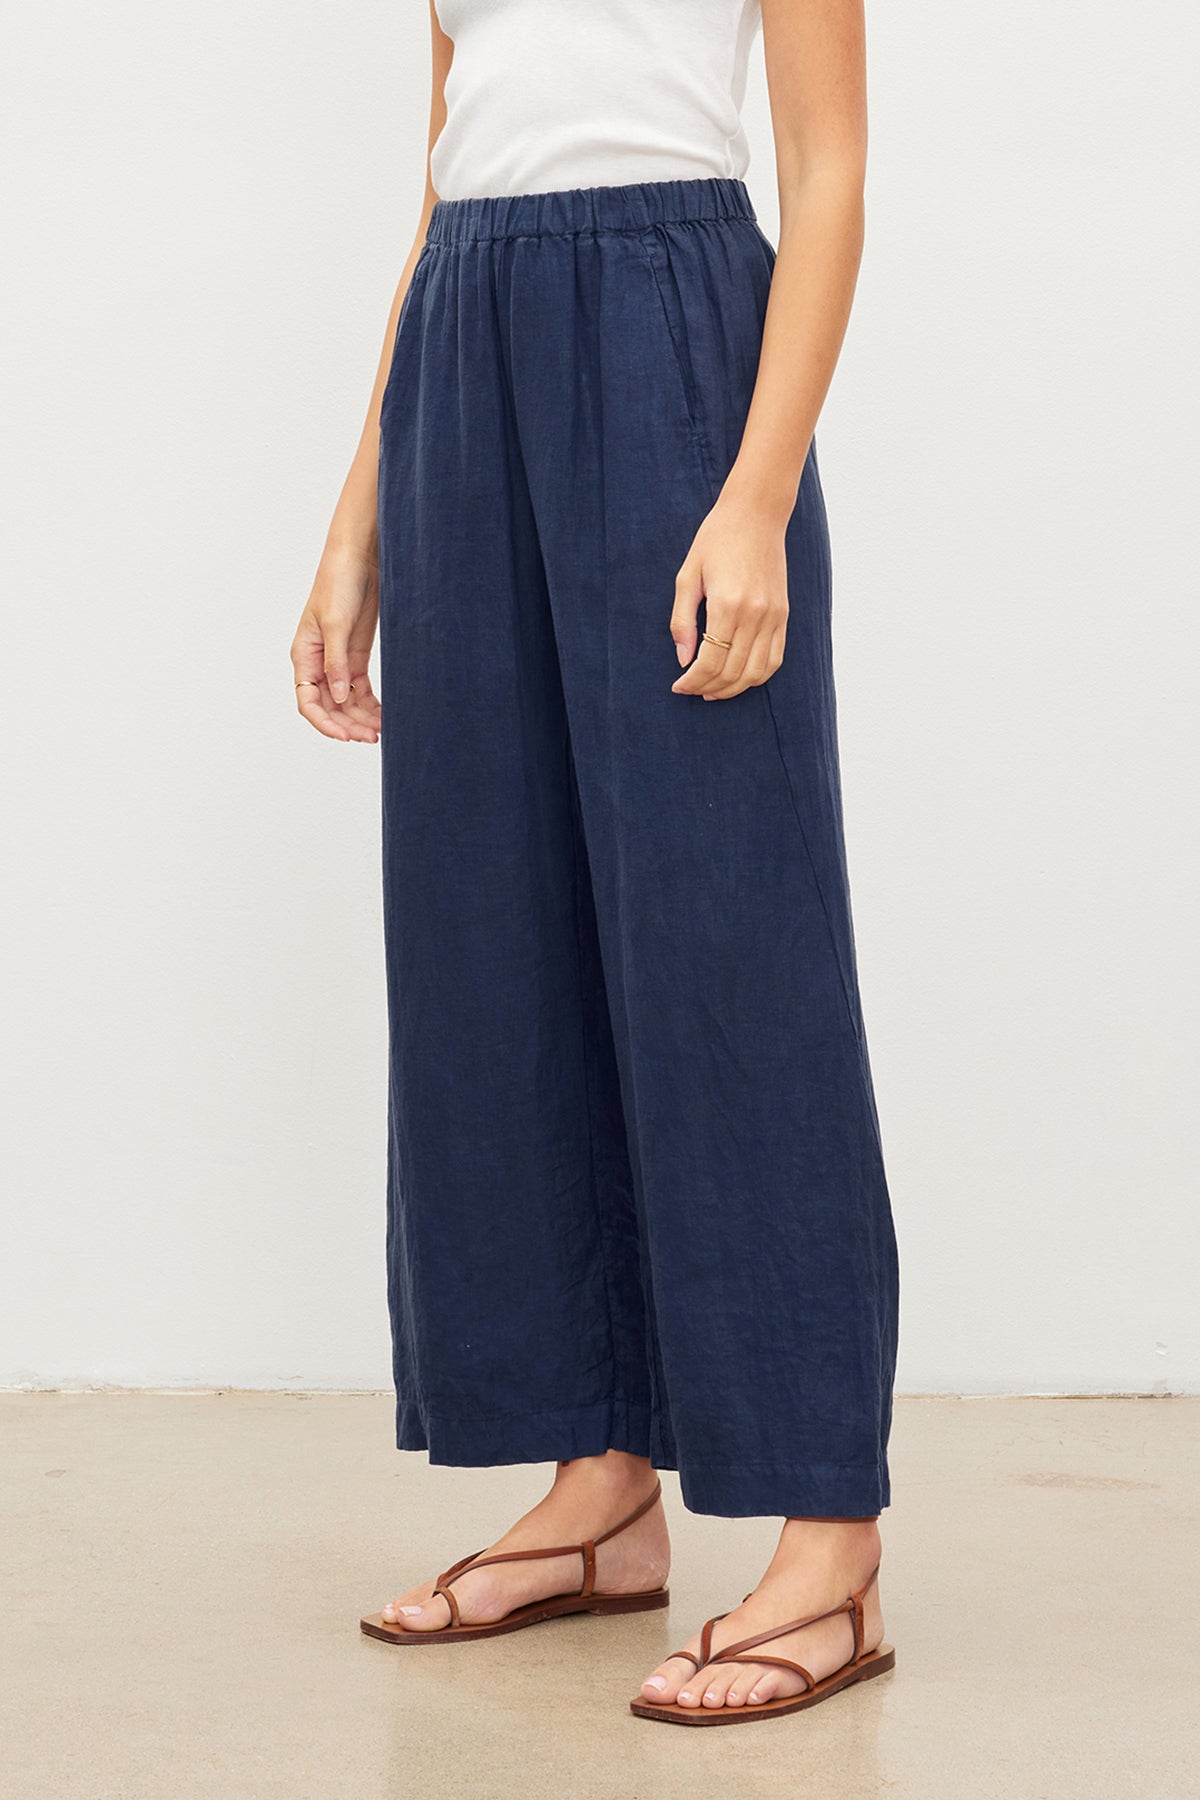 A woman wearing a pair of Velvet by Graham & Spencer LOLA LINEN PANT. The lightweight linen fabric provides comfort and breathability, while the elastic waist ensures a comfortable fit.-36161318617281